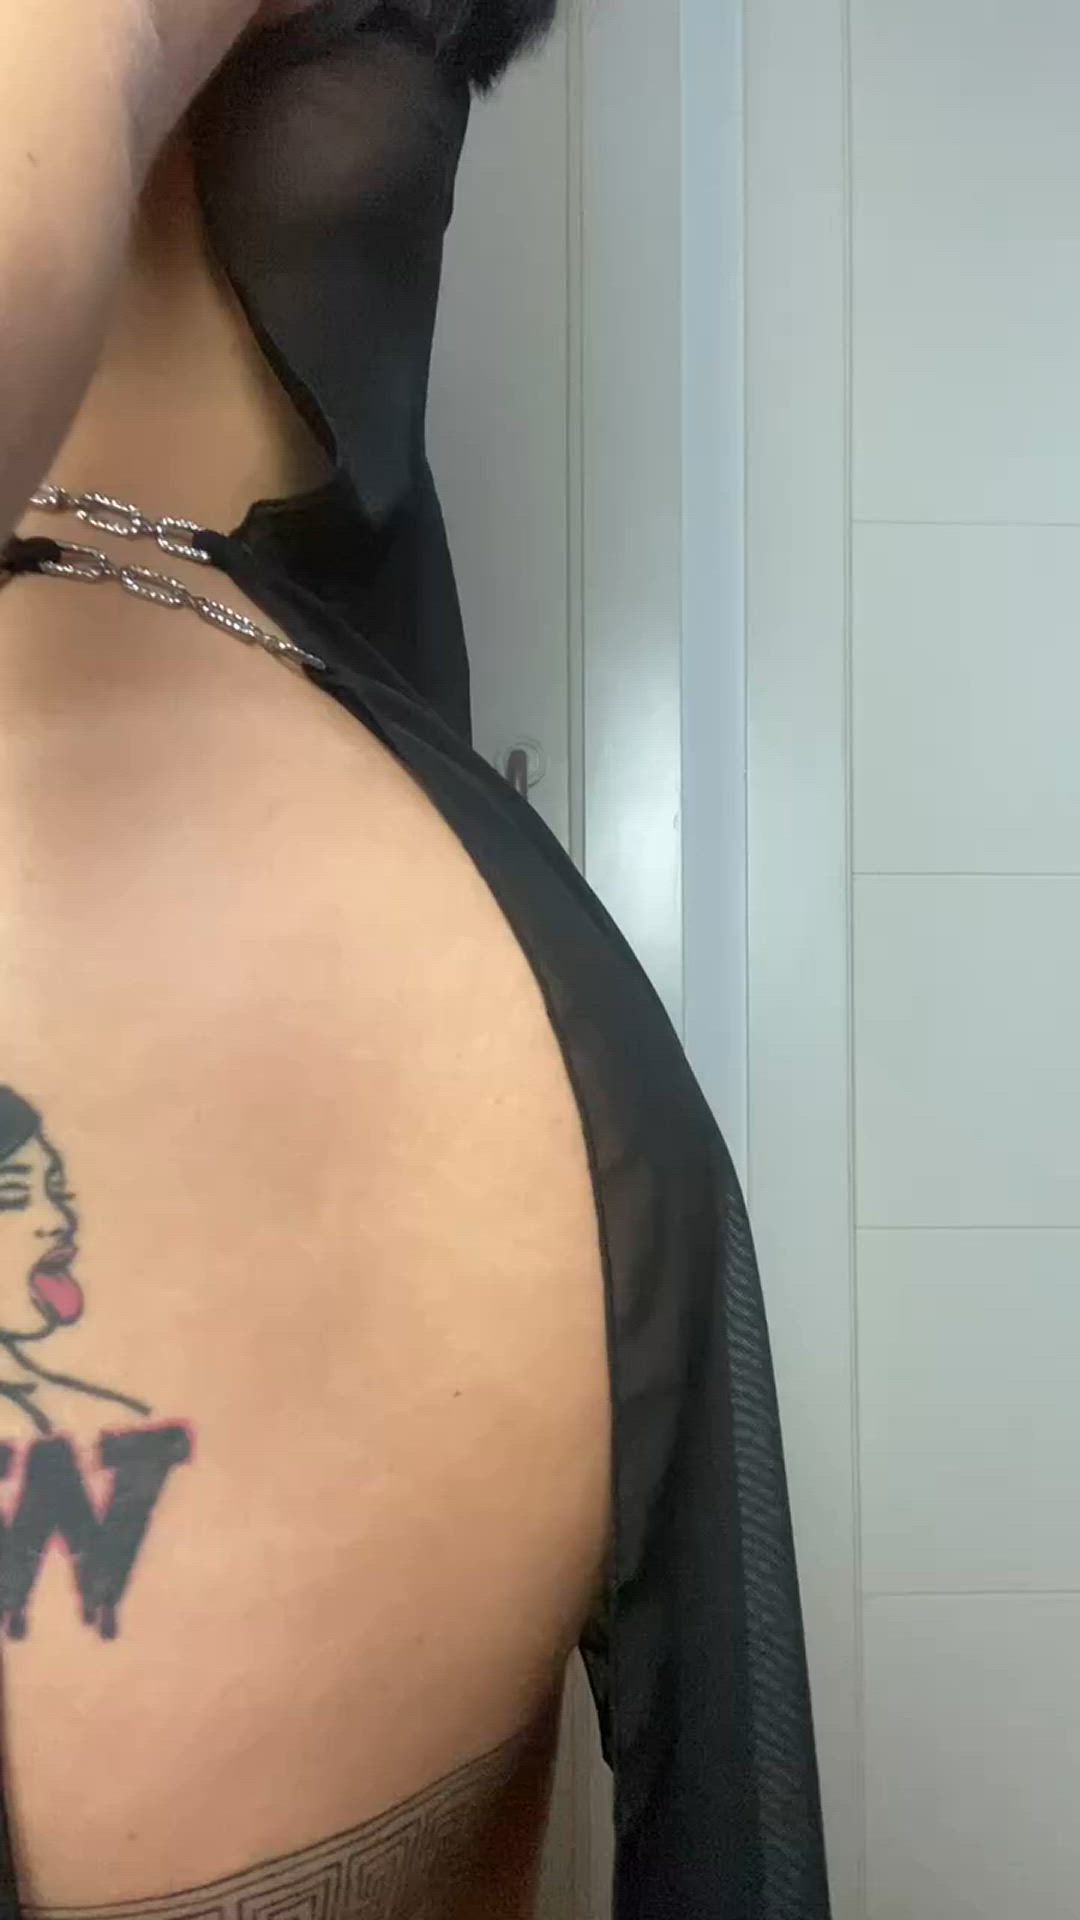 Ass porn video with onlyfans model dulcemiel <strong>@thahahamischel</strong>